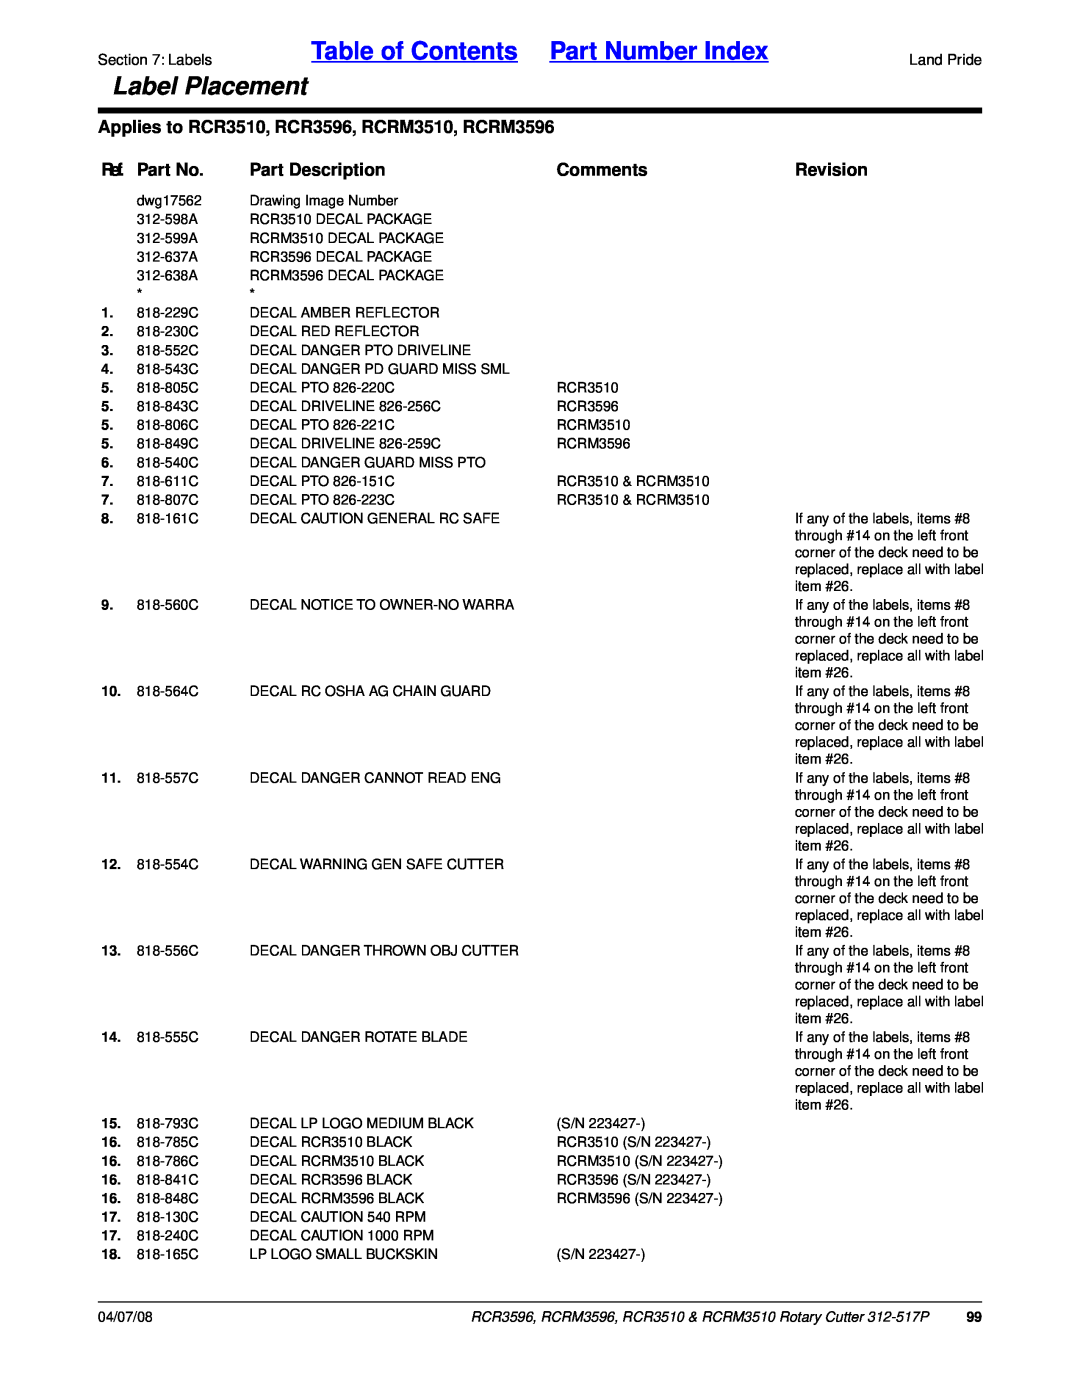 Land Pride manual Table of Contents Part Number Index, Label Placement, Applies to RCR3510, RCR3596, RCRM3510, RCRM3596 